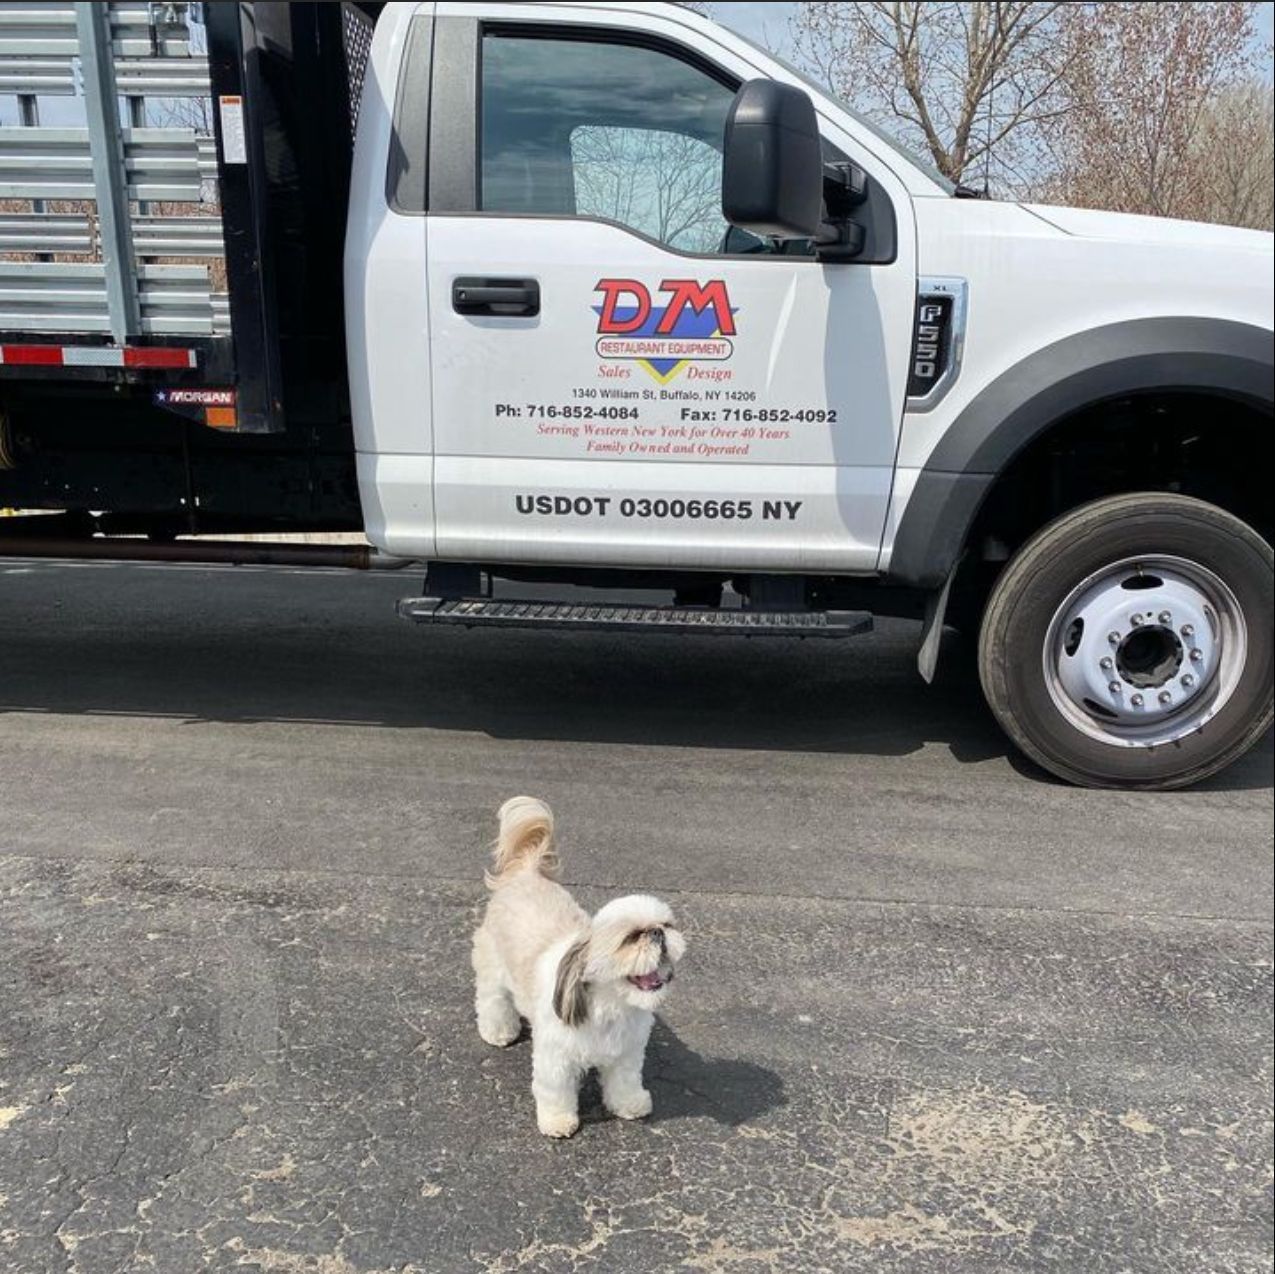 a small dog standing in front of a truck that says dm construction equipment